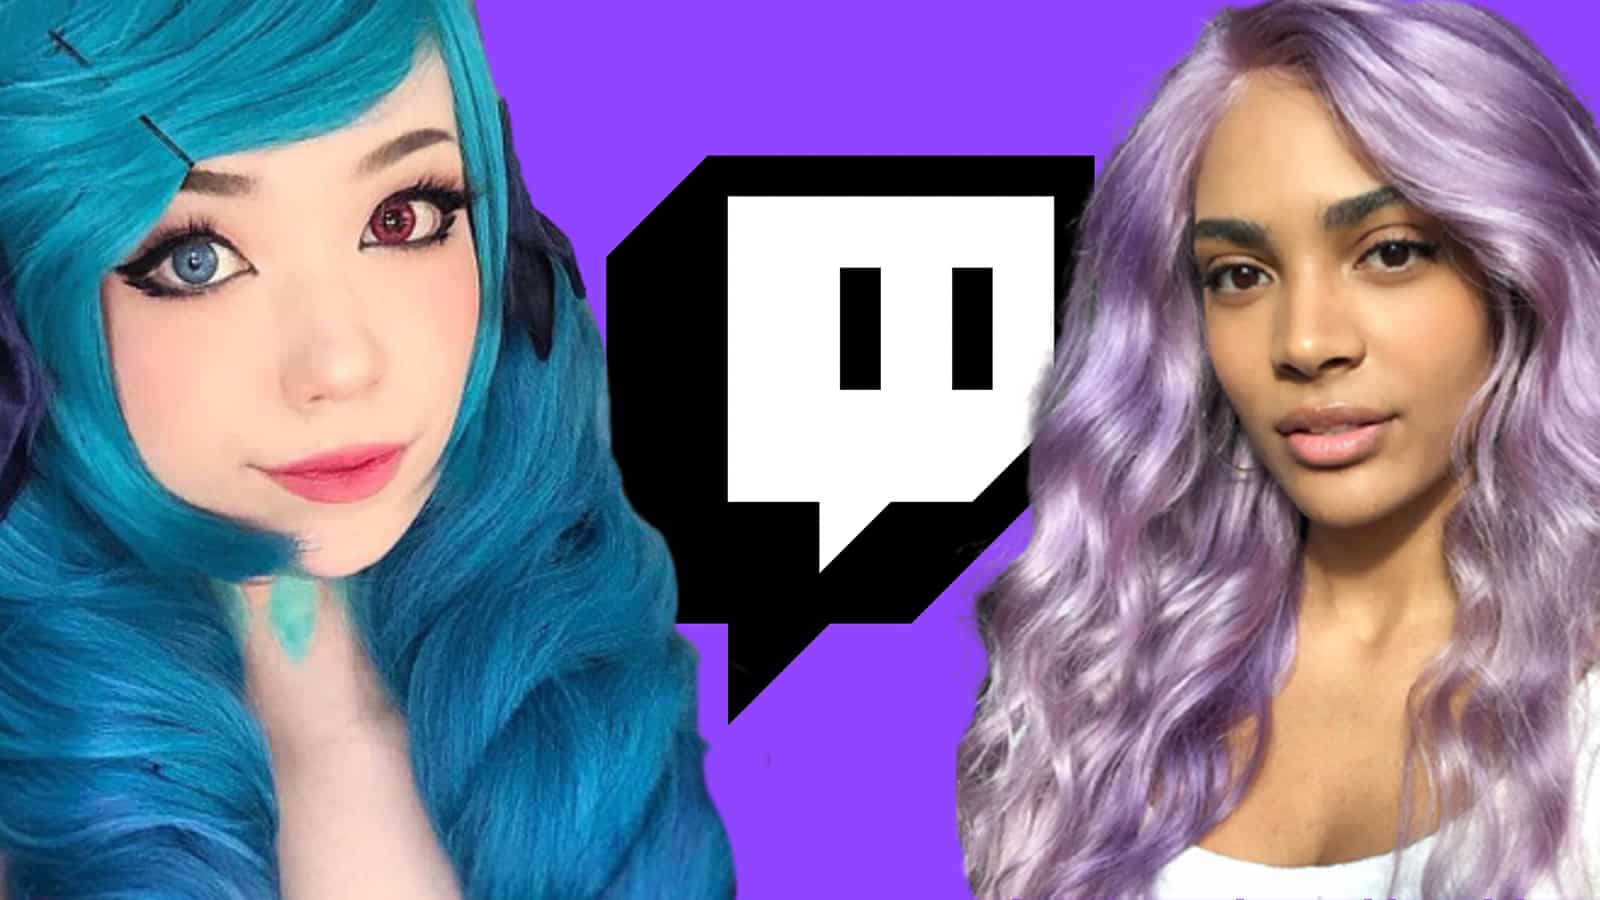 Emiru and Sydeon with twitch logo